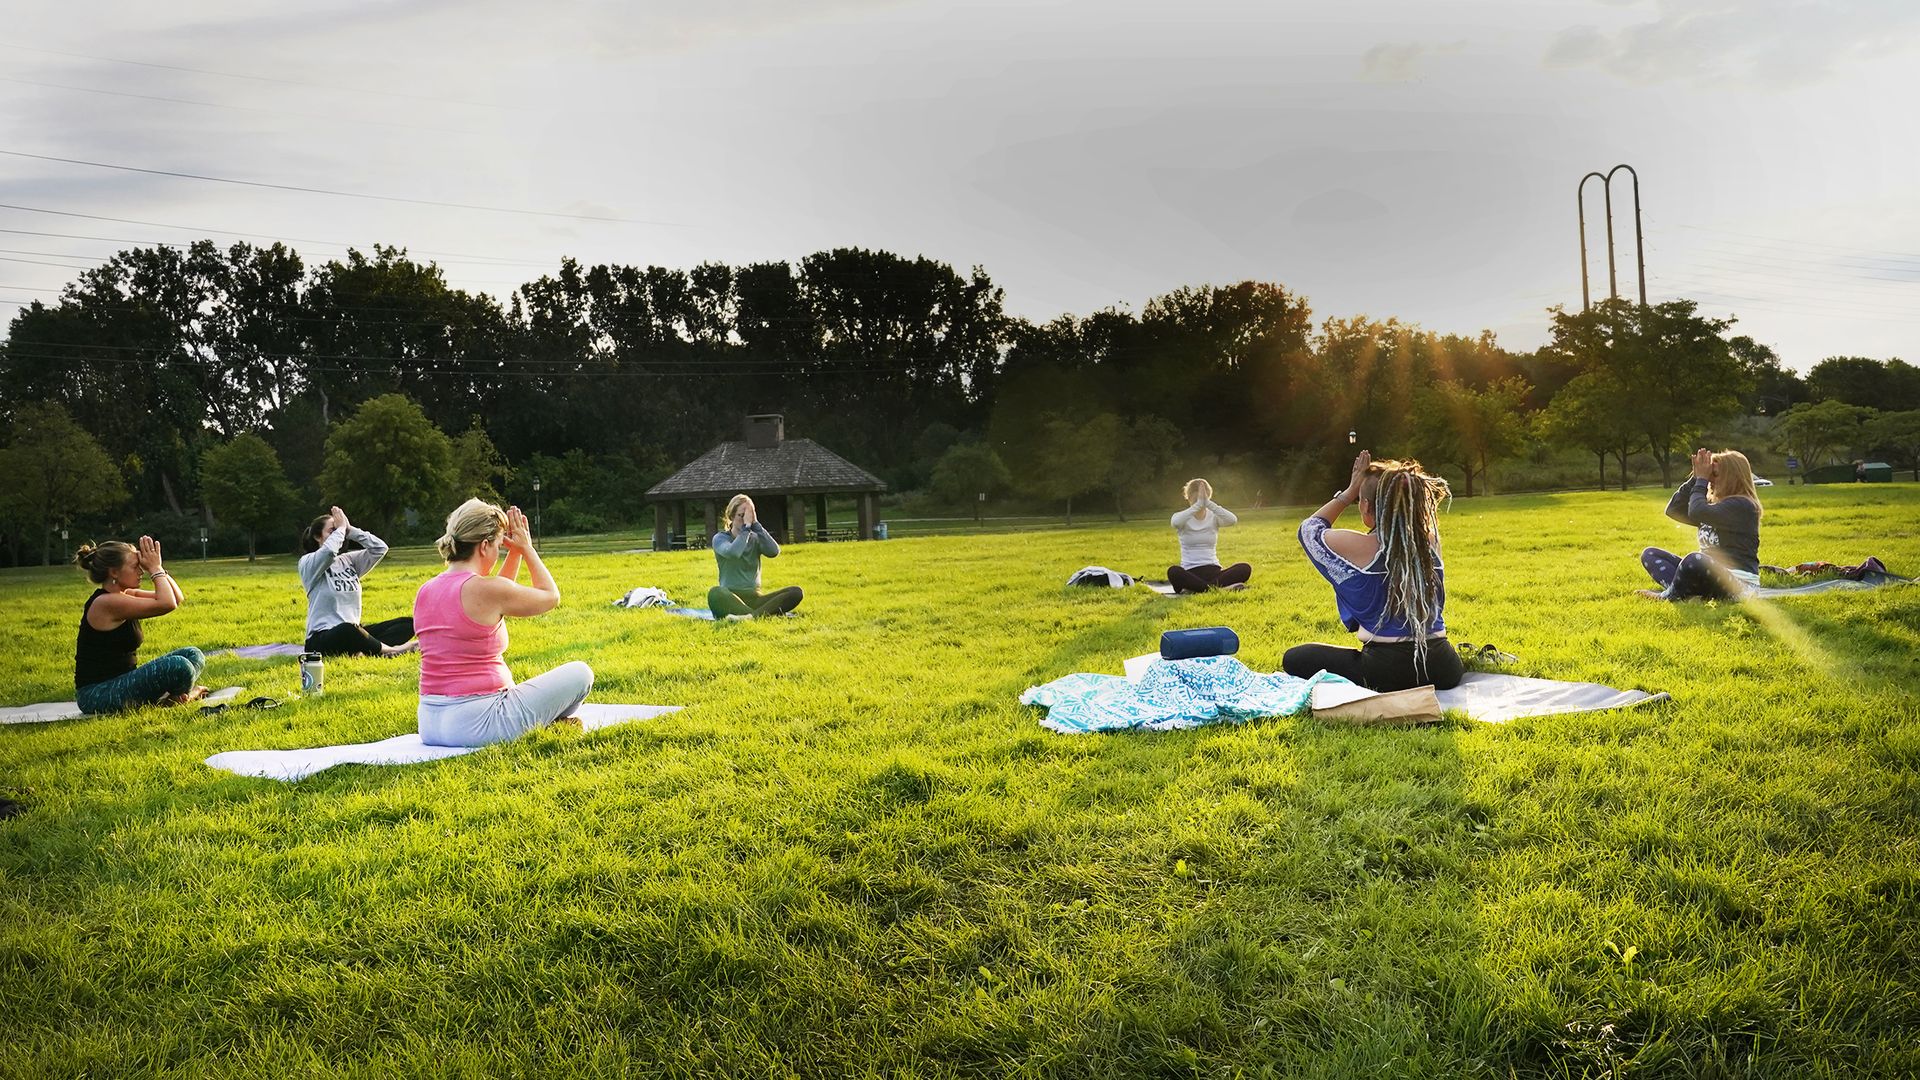 people sit in a circle doing yoga in a park on grass